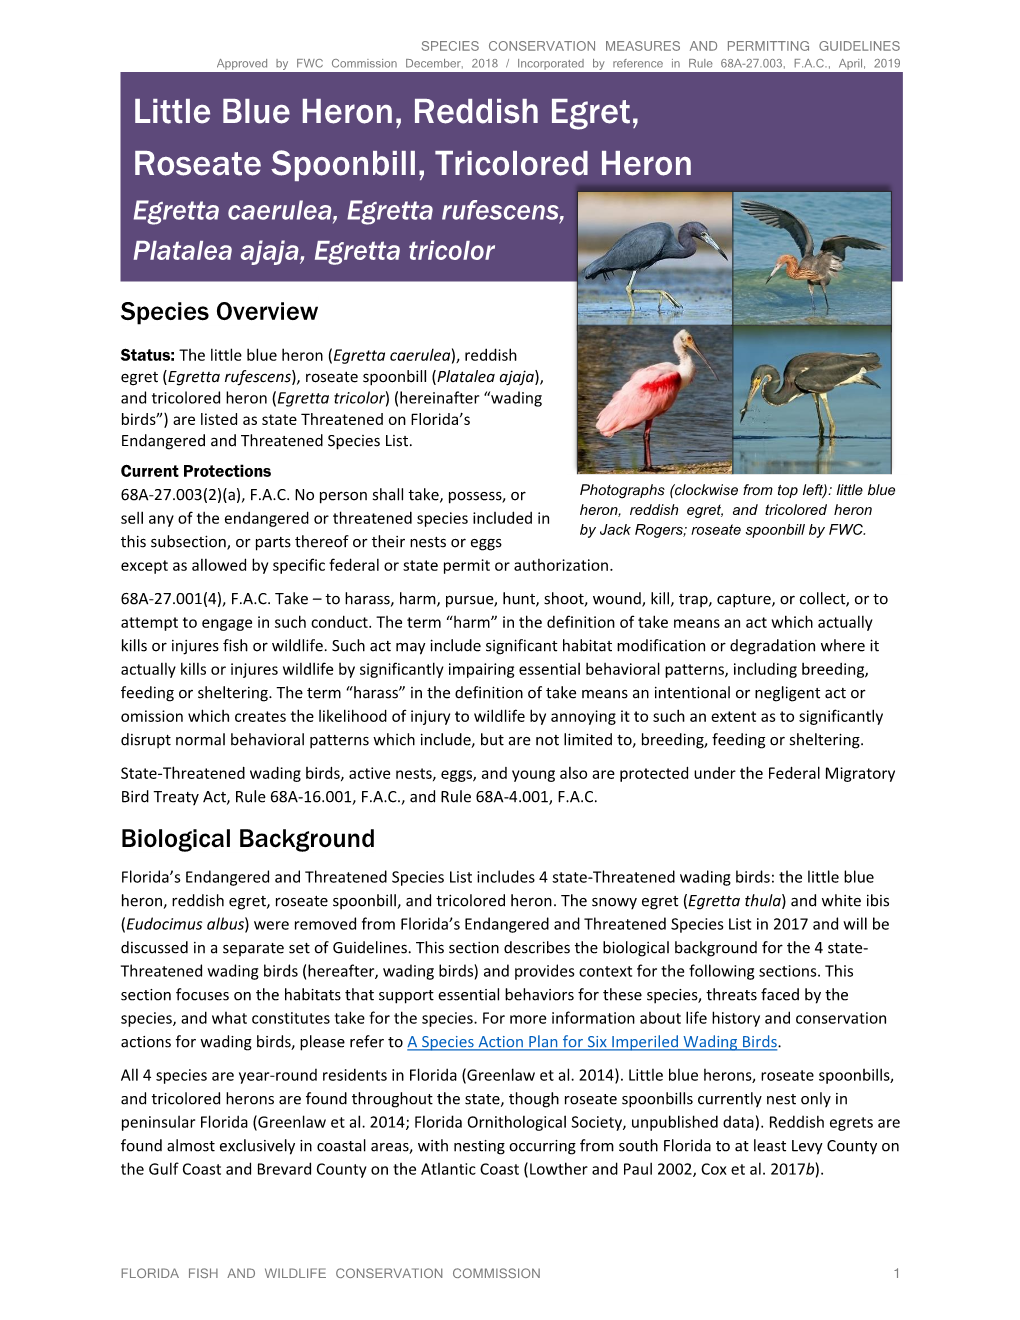 Little Blue Heron, Reddish Egret, Roseate Spoonbill, and Tricolored Heron Species Conservation Measures and Permitting Guidelin